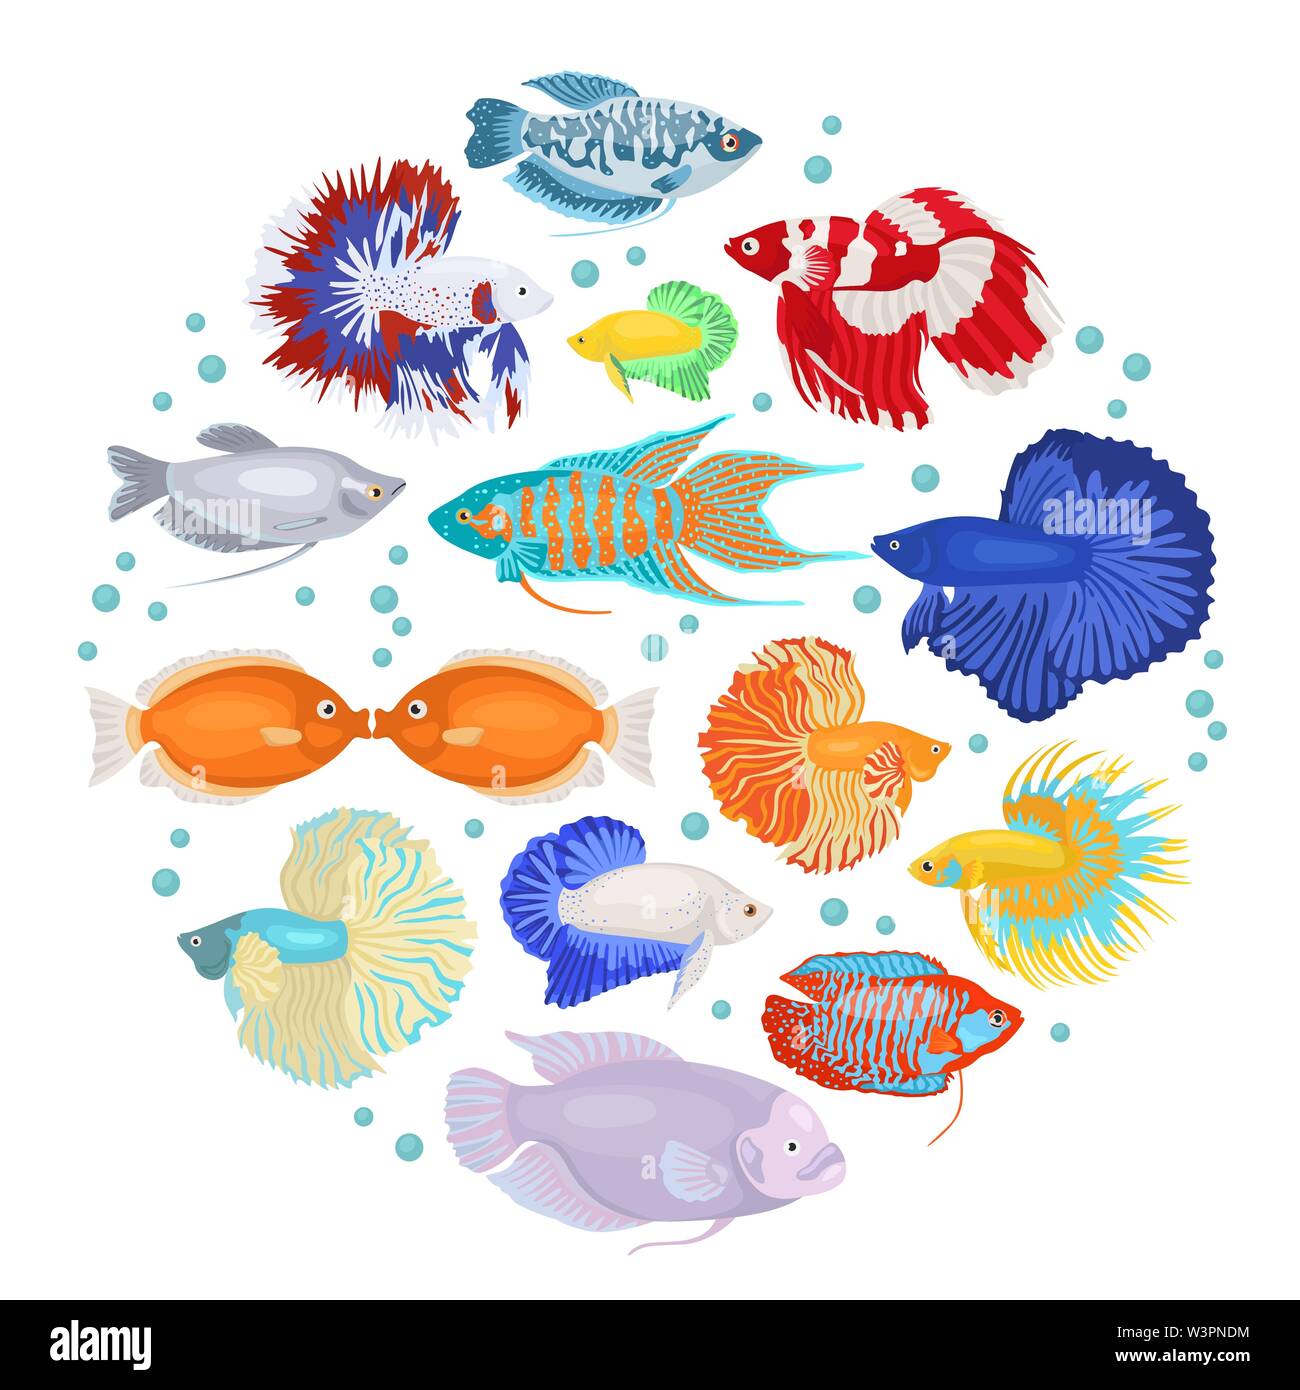 Freshwater aquarium fishes breeds icon set flat style isolated on white. Labyrinth fishes: betta, gourami. Create own infographic about pets. Vector i Stock Vector